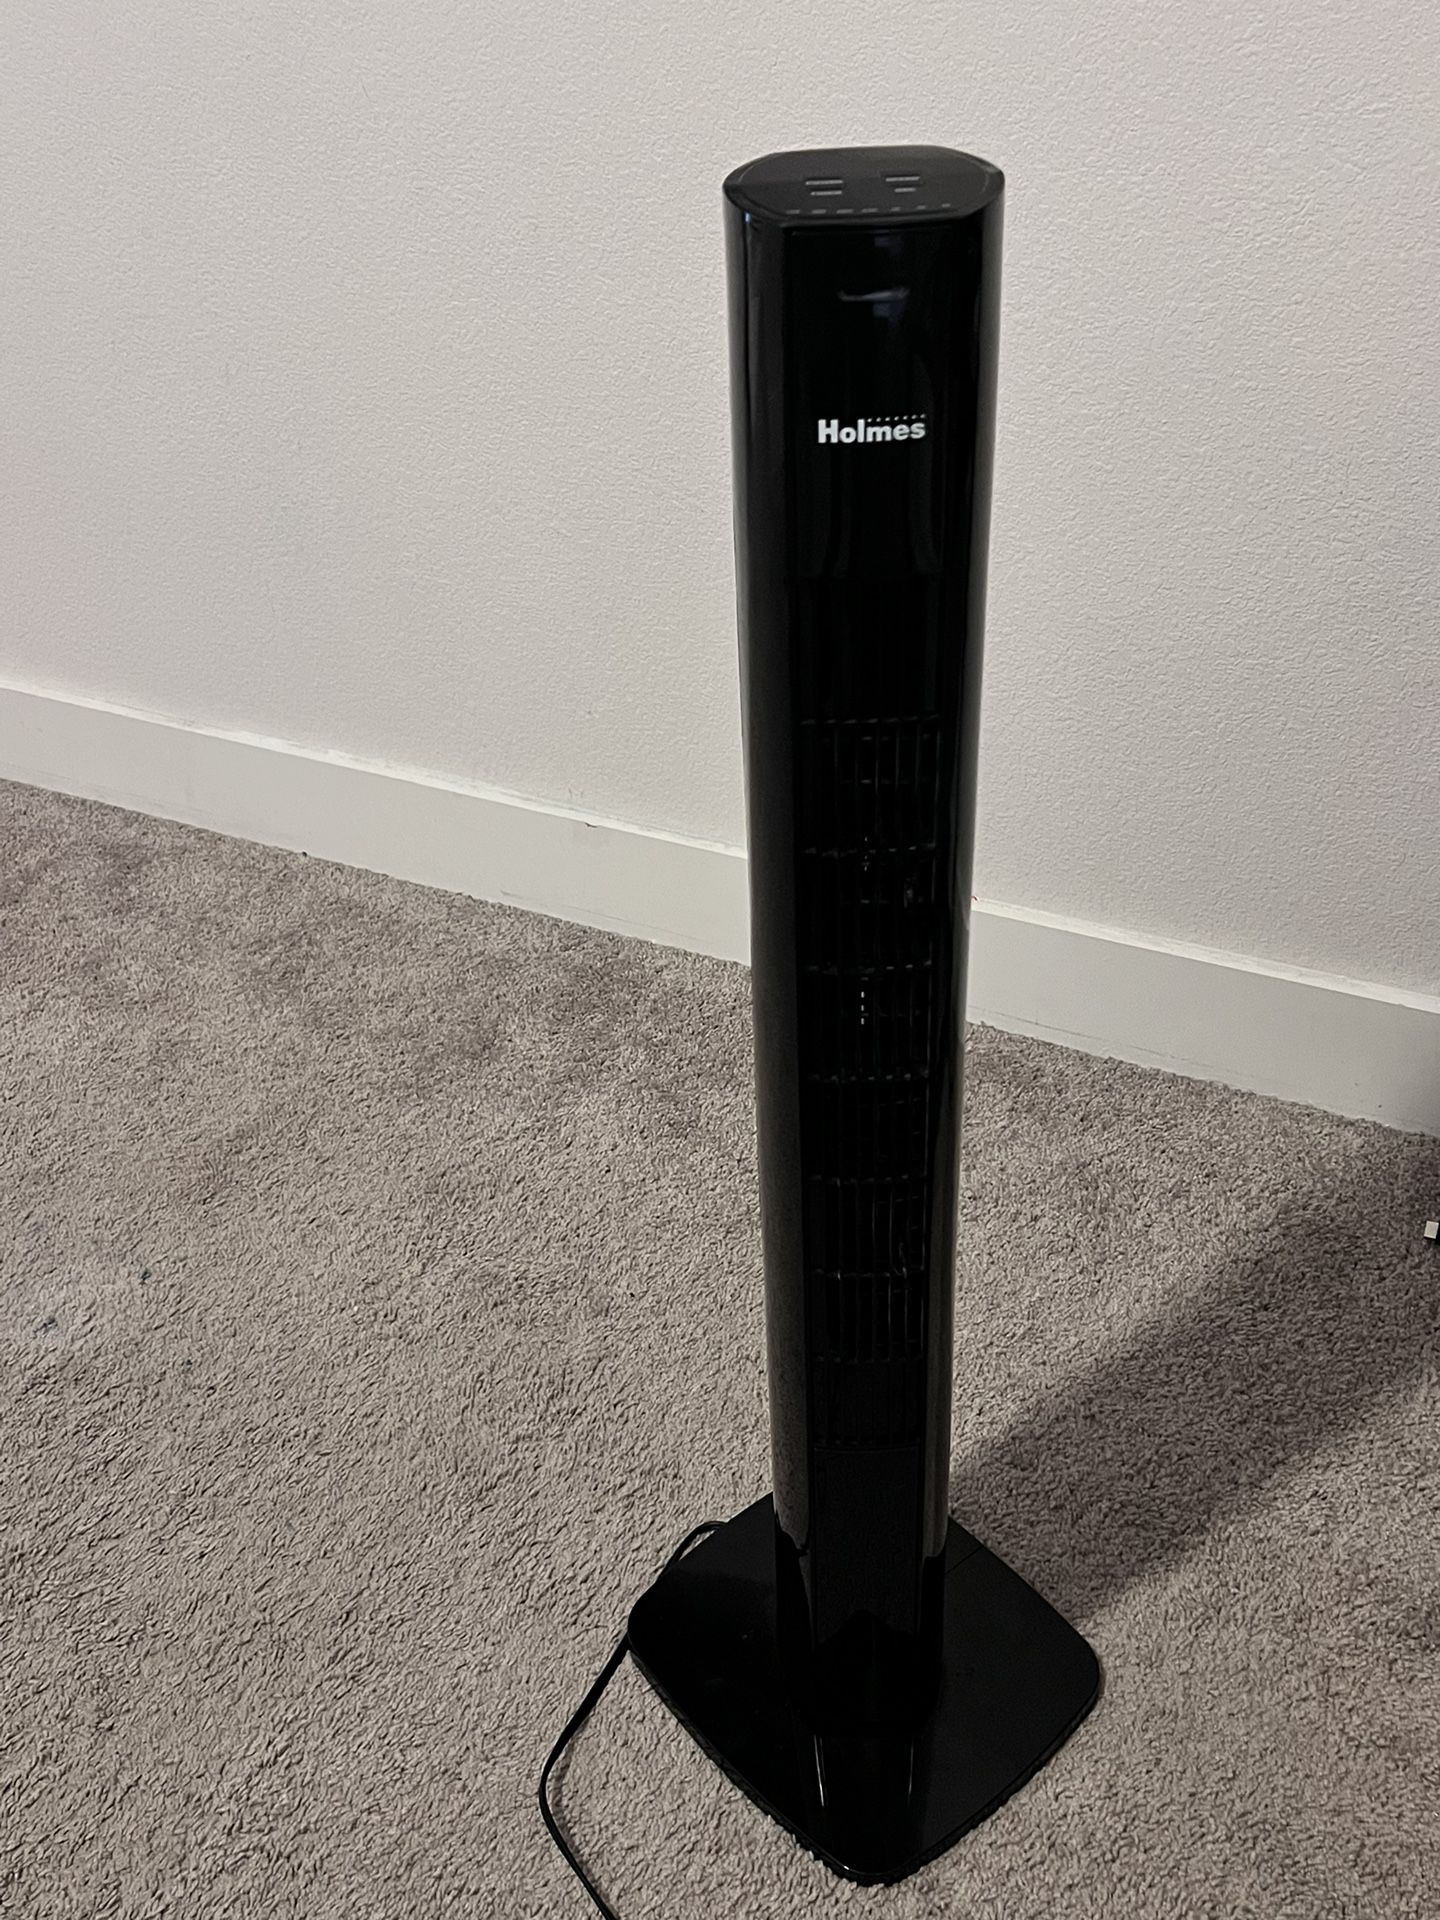 Holmes Tower Fan, Used Like New - 6 Months Old